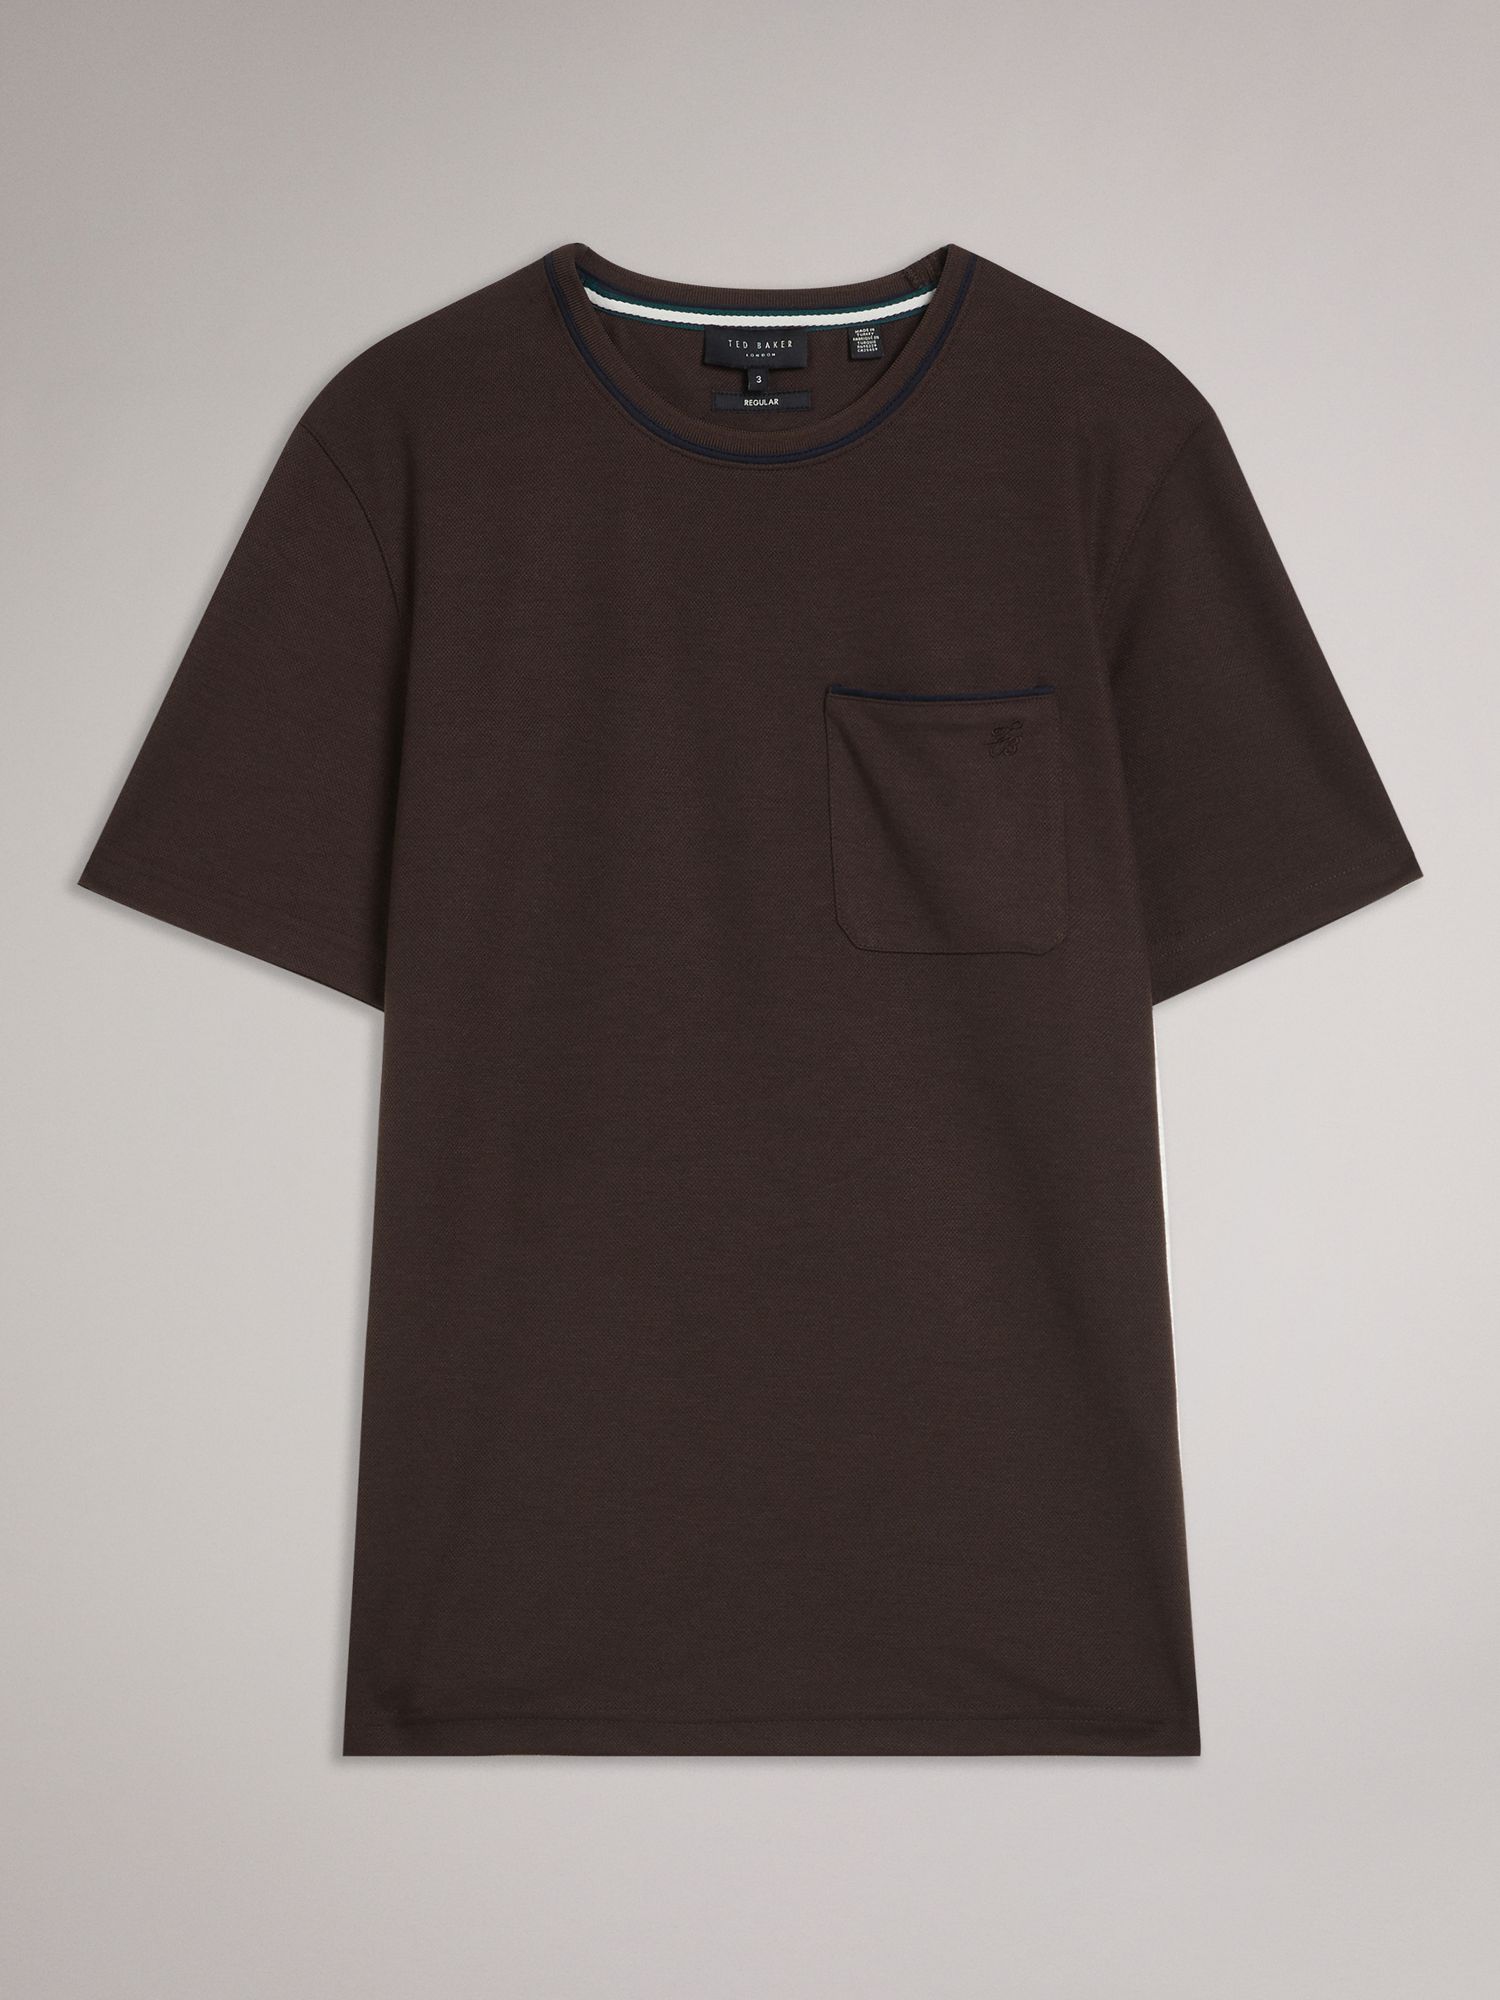 Ted Baker Grine Suede Trim T-Shirt, Brown Mid, XXL